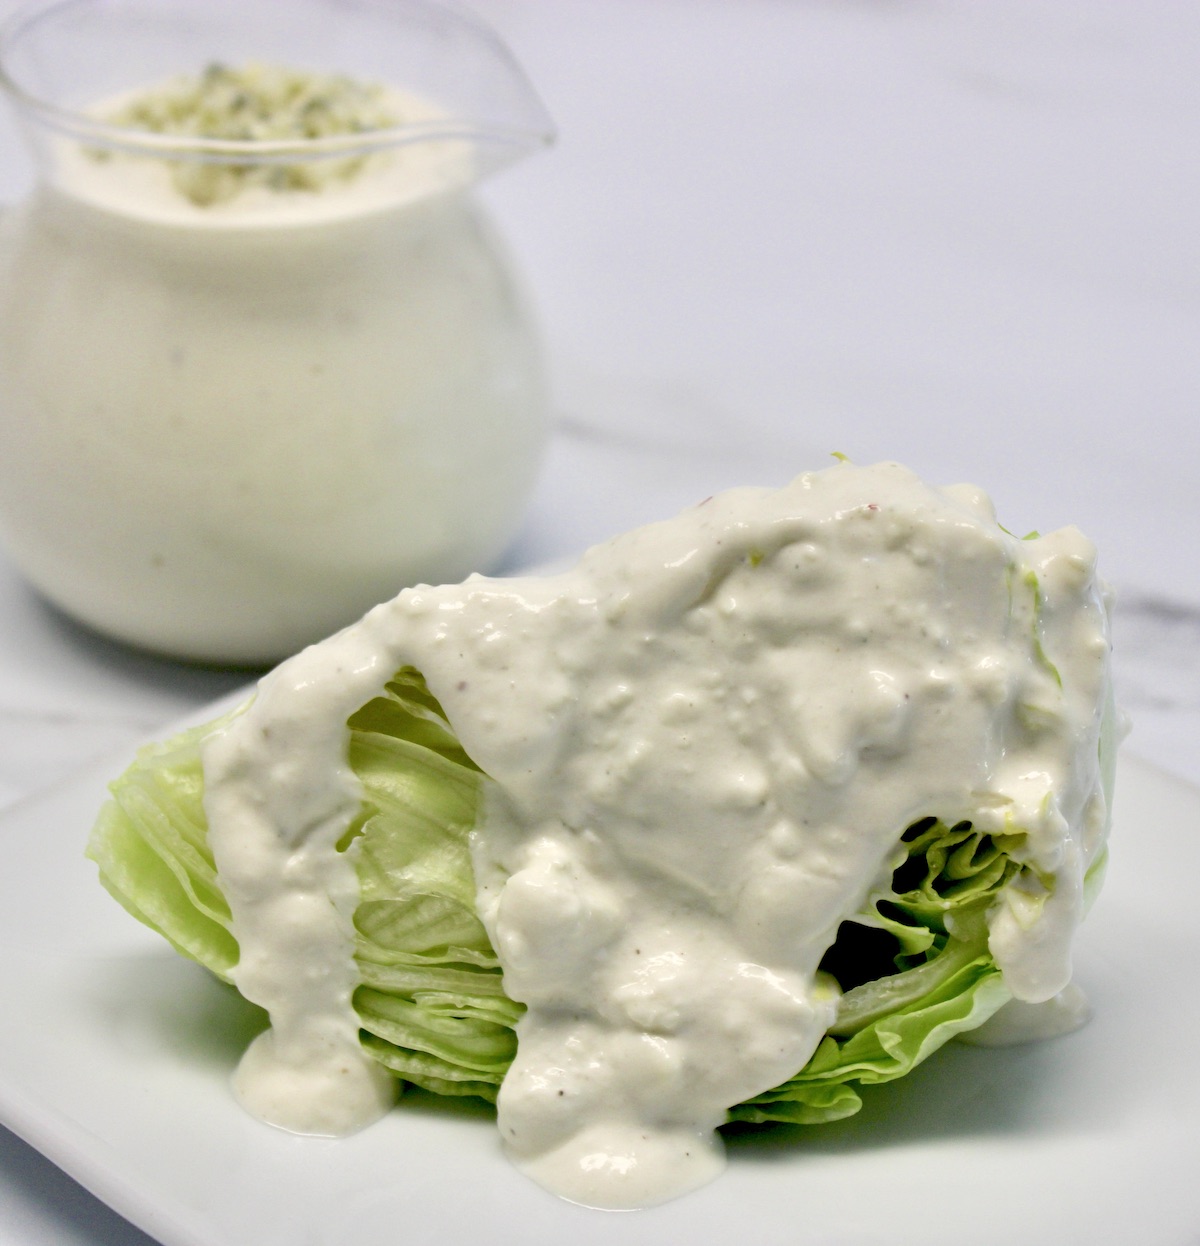 Keto Blue Cheese Dressing over iceberg wedge on white plate with glass pitcher in background